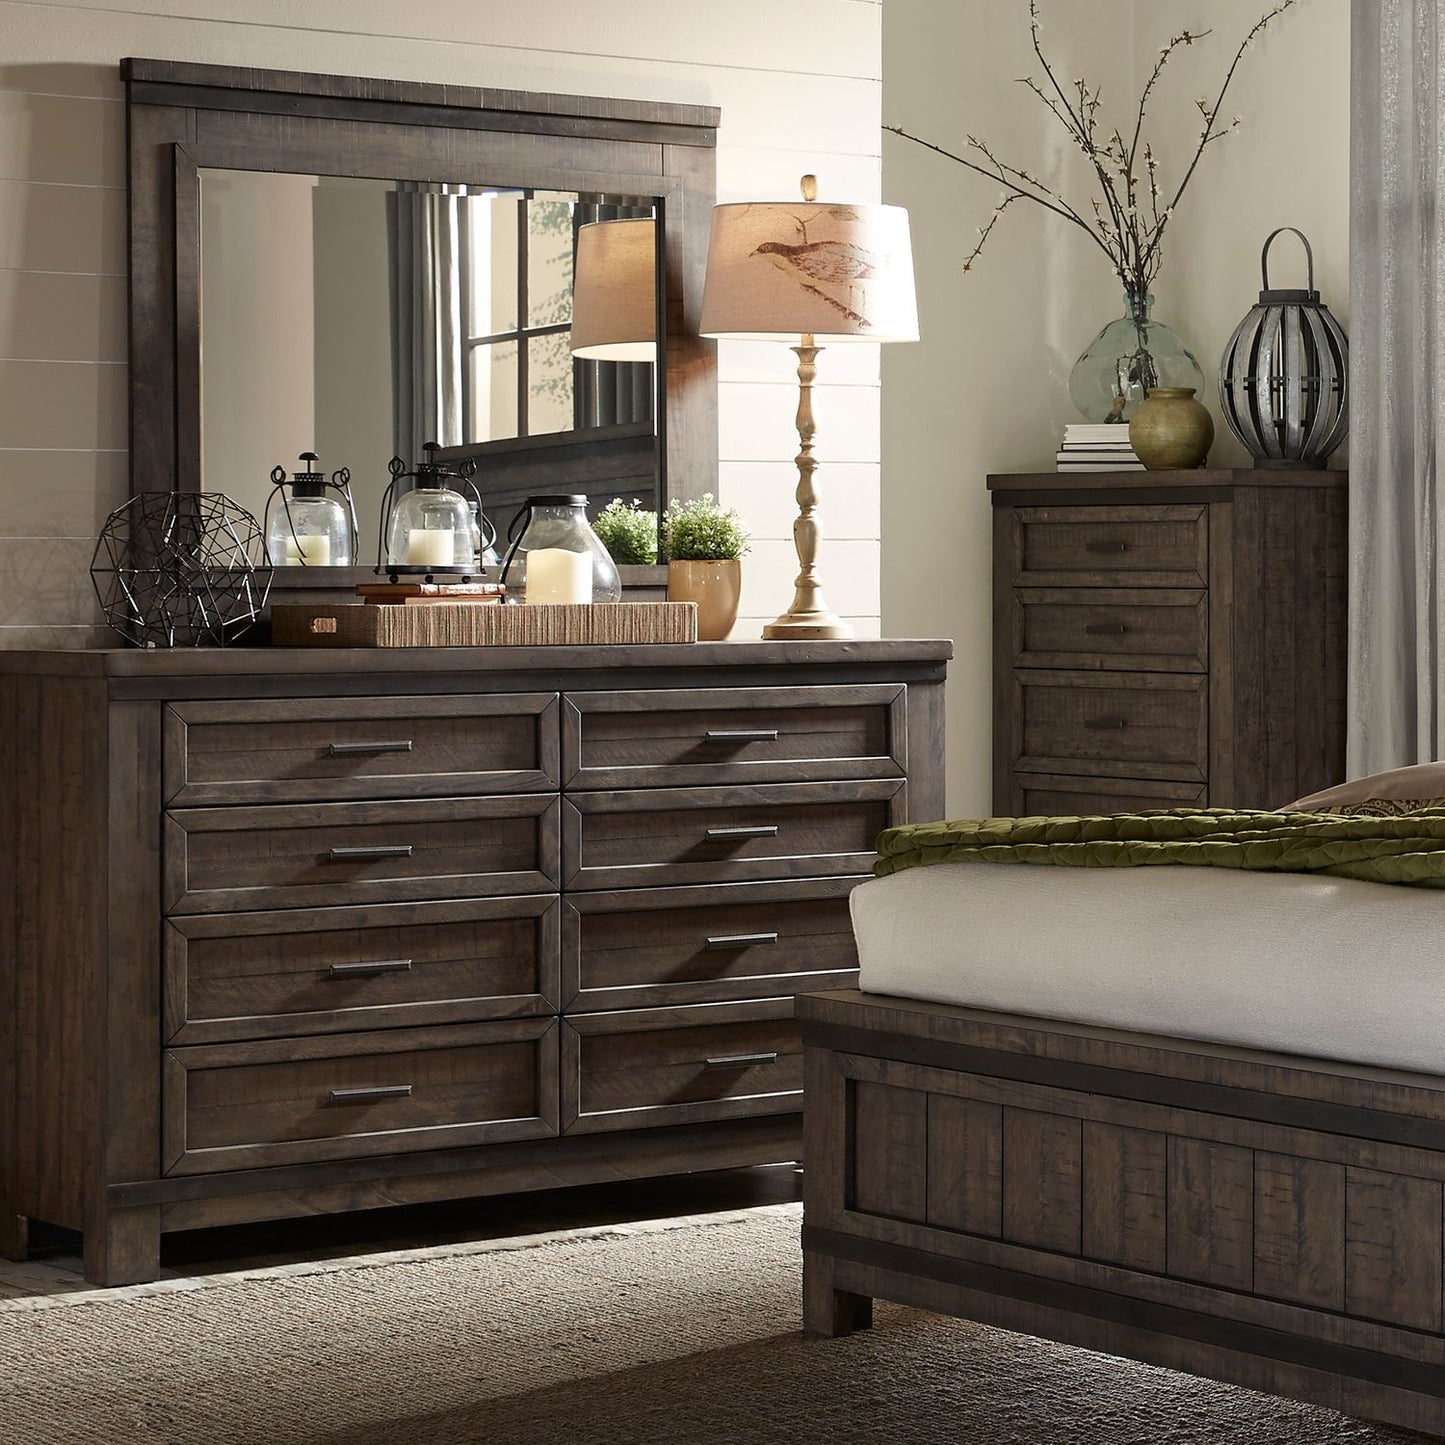 Thornwood Hills - King Two Sided Storage Bed, Dresser & Mirror, Chest, Night Stand